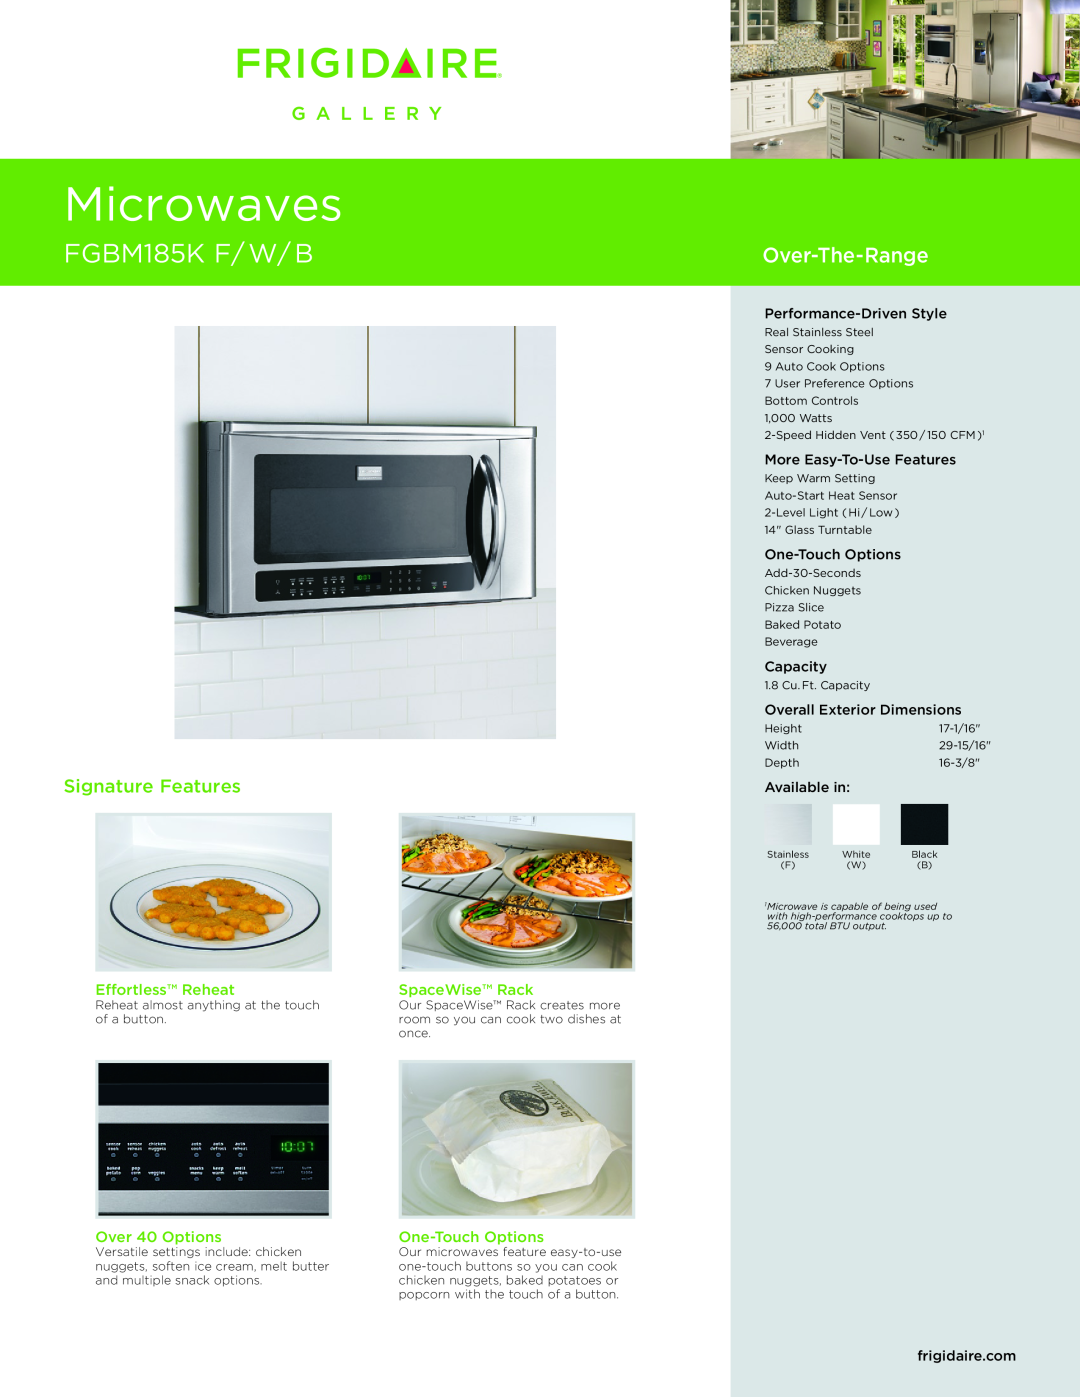 Frigidaire FGBM185KW dimensions Performance-DrivenStyle, More Easy-To-UseFeatures, One-TouchOptions, Capacity, Microwaves 